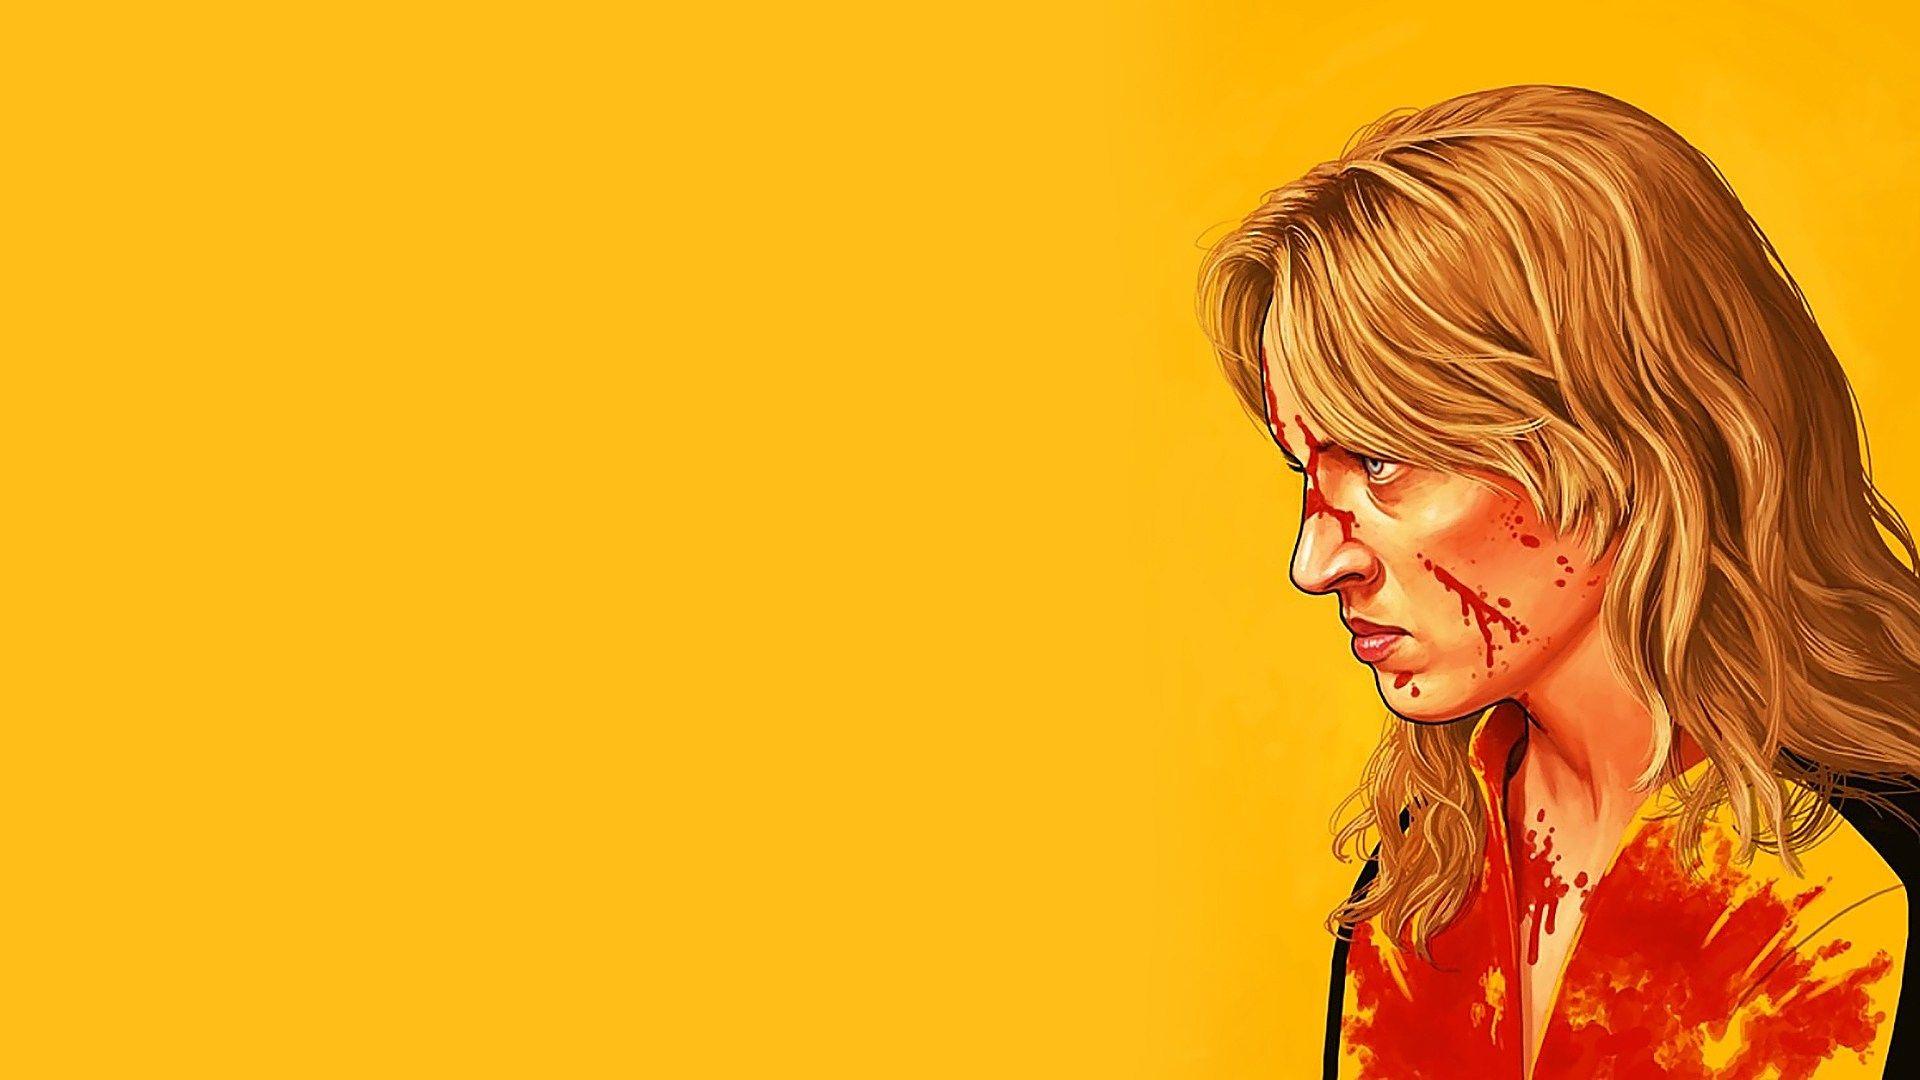 20 Kill Bill Vol 1 HD Wallpapers and Backgrounds